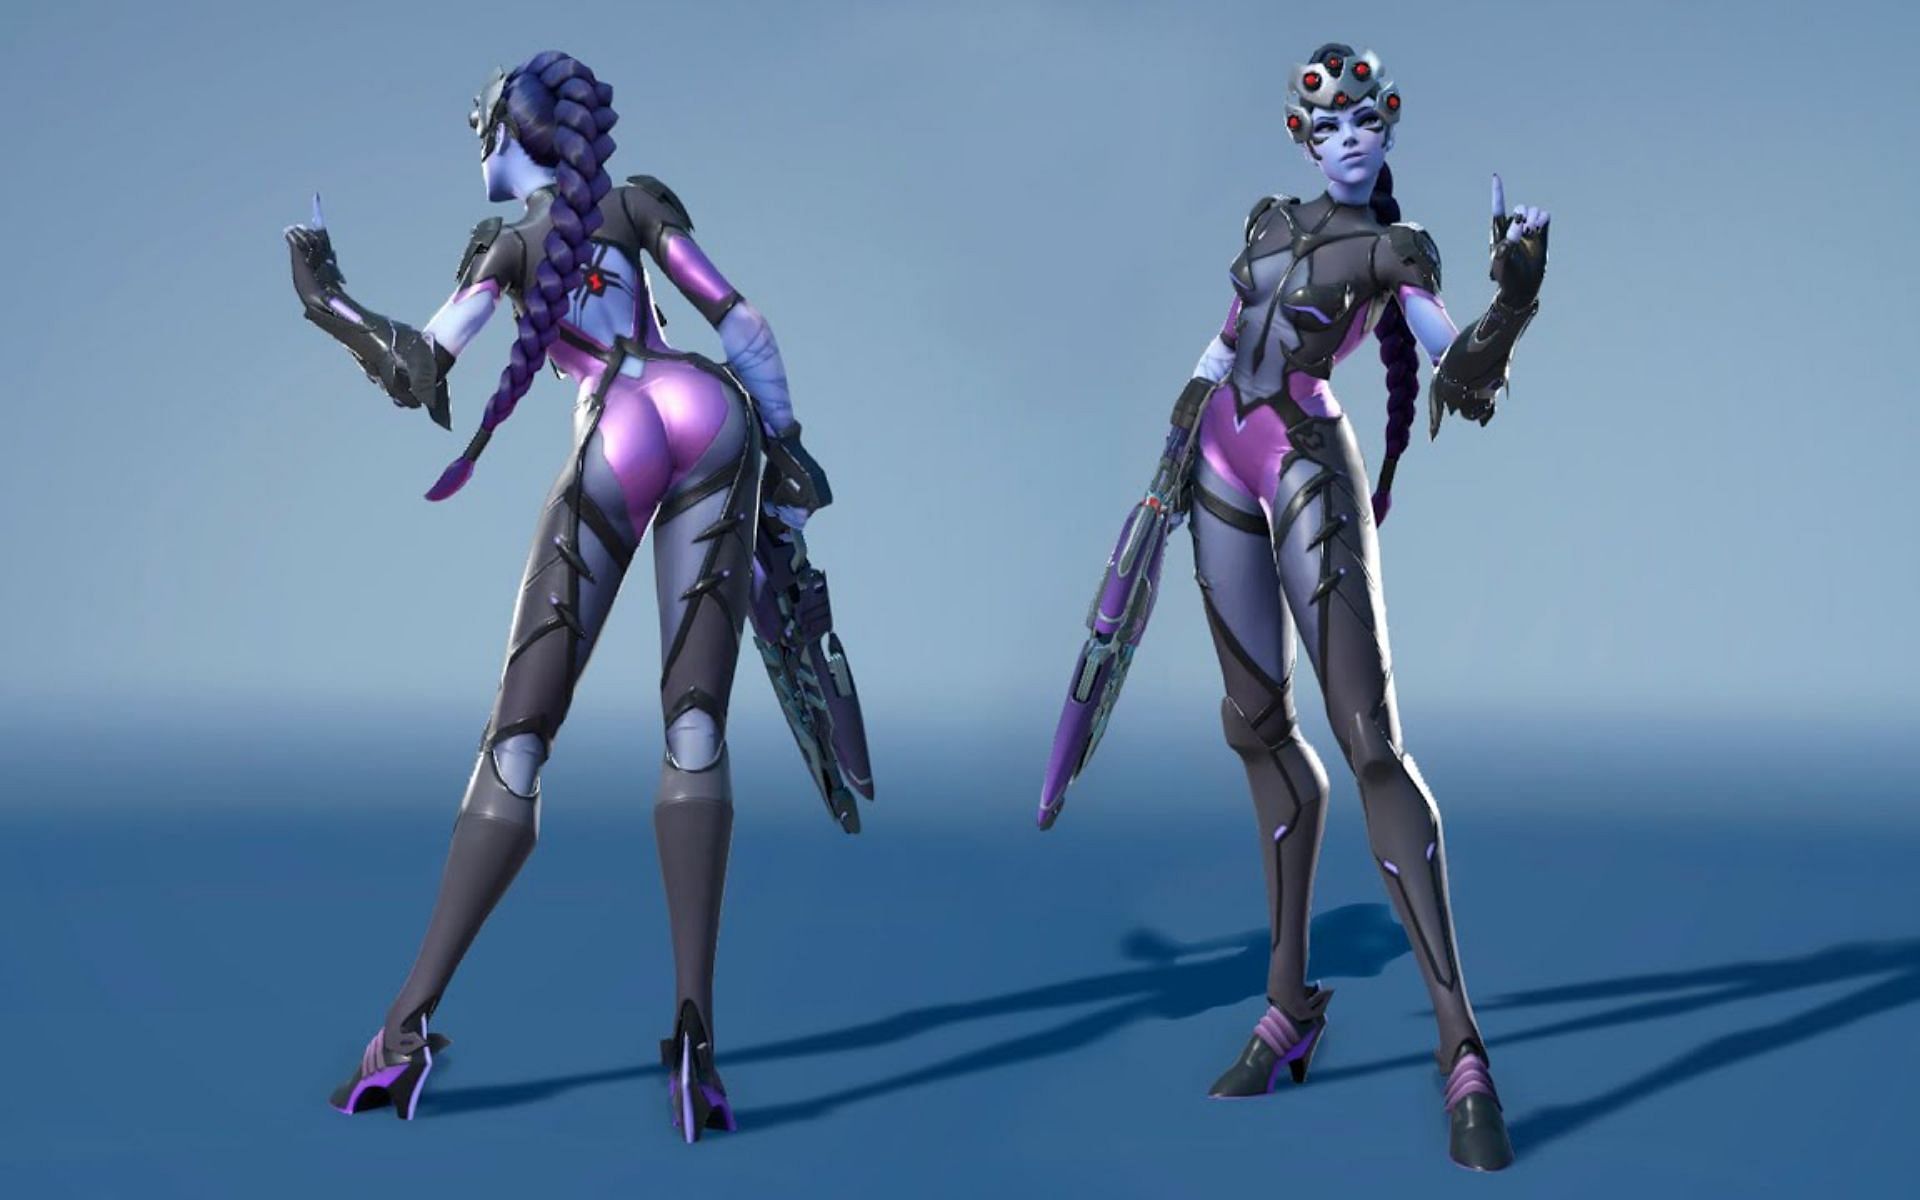 Best crosshair and DPI settings for Widowmaker in Overwatch 2